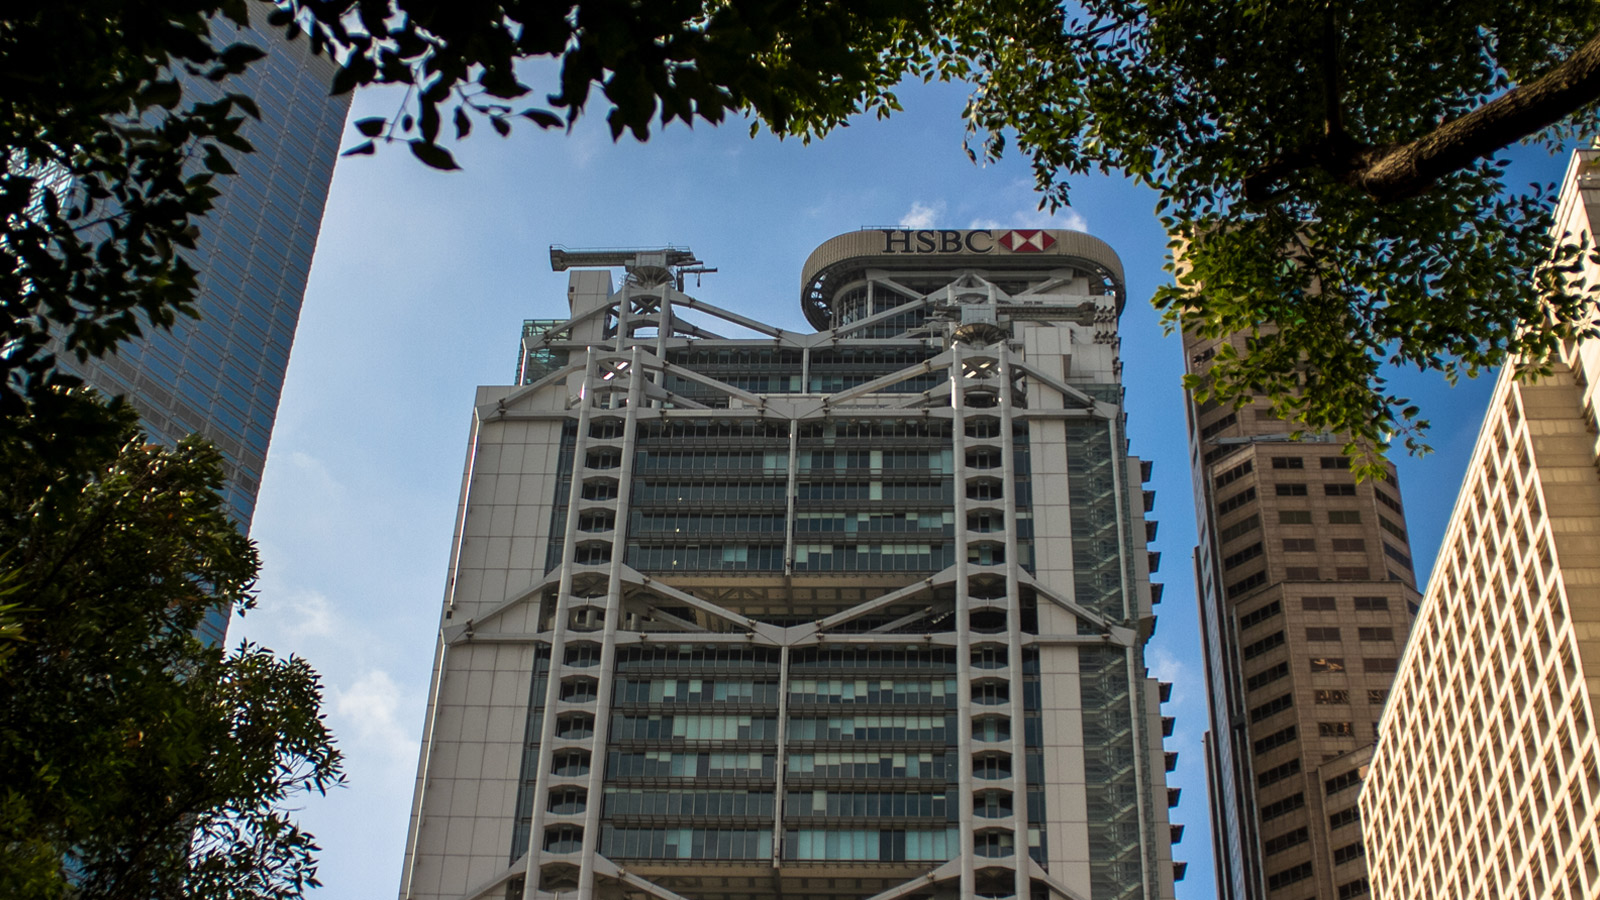 HSBC’s main building in Hong Kong, which opened in 1986